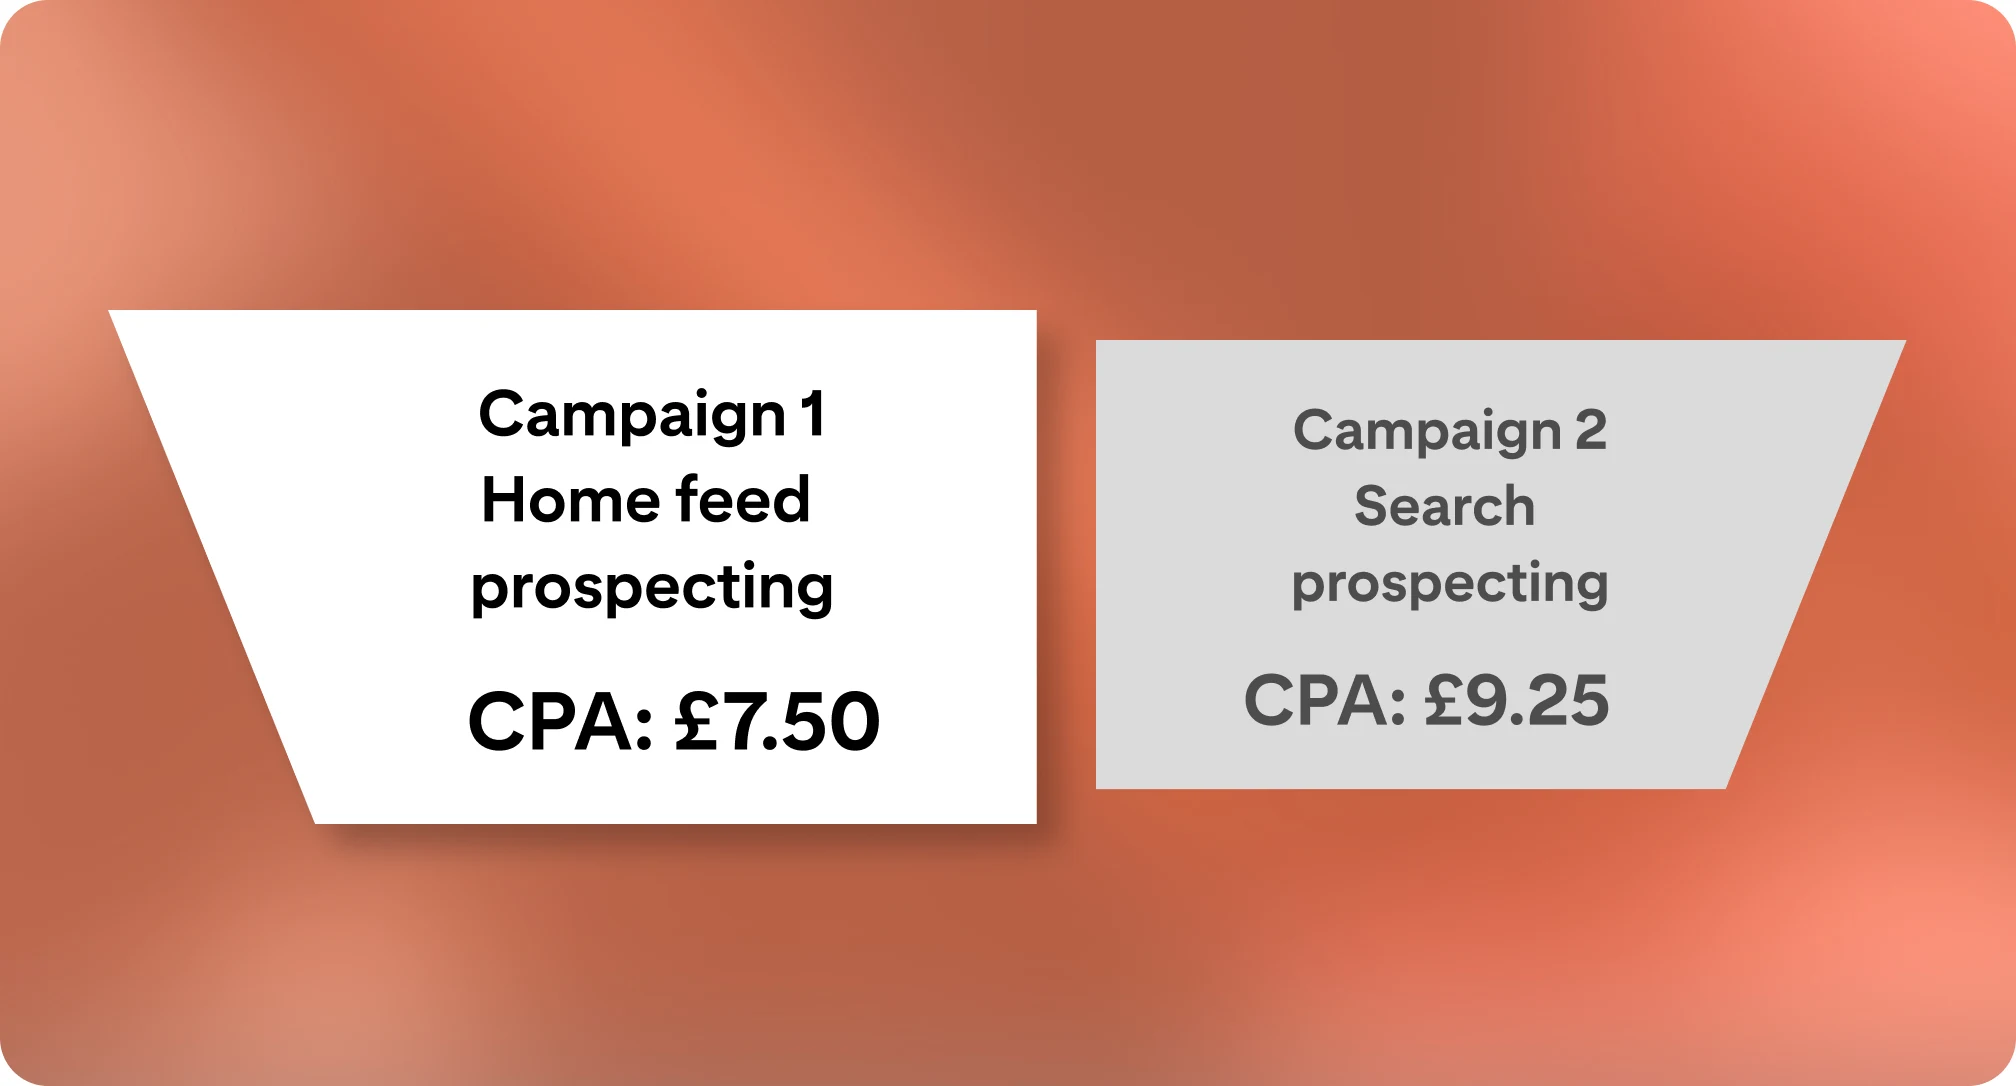 A side-by-side comparison of two campaigns; campaign 1 is highlighted and labelled as the winning campaign due to its lower cost per acquisition, while campaign 2 is subtly shaded in the background to symbolise lesser efficacy.